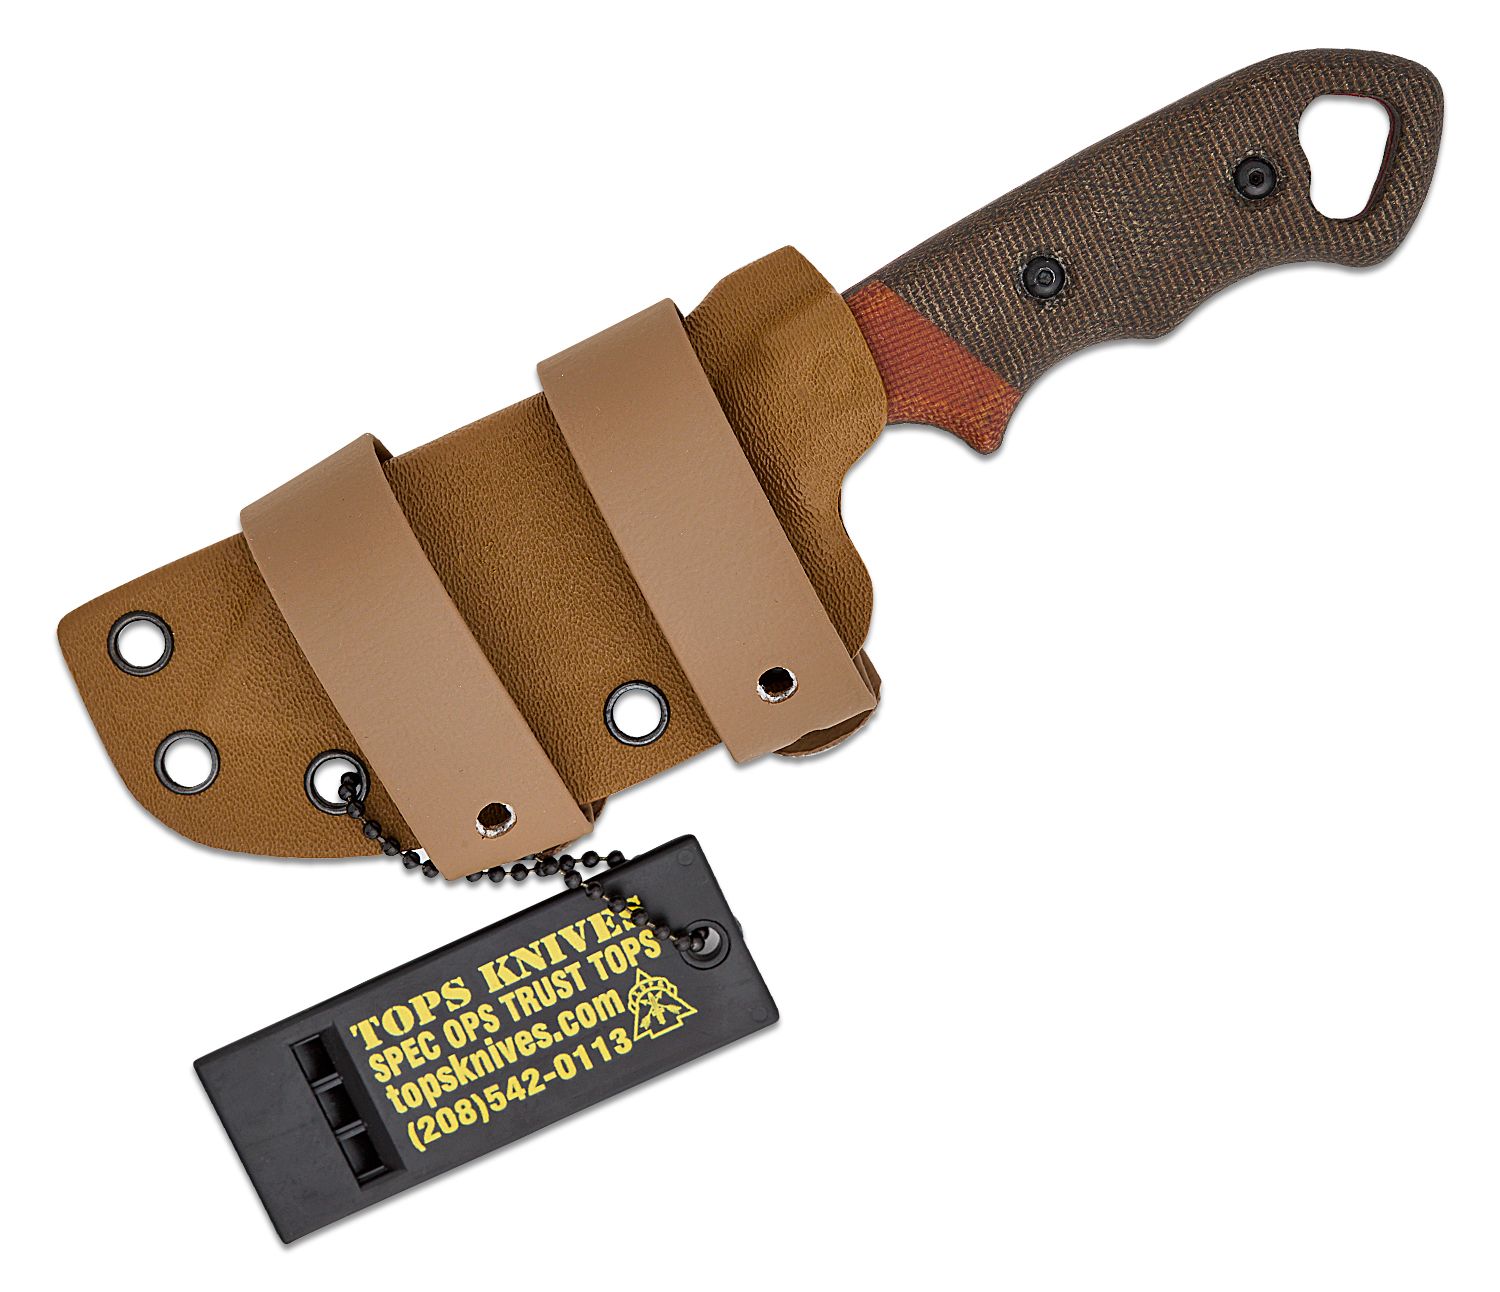 Hacha táctica  Knife, Tactical knives, Knives and swords